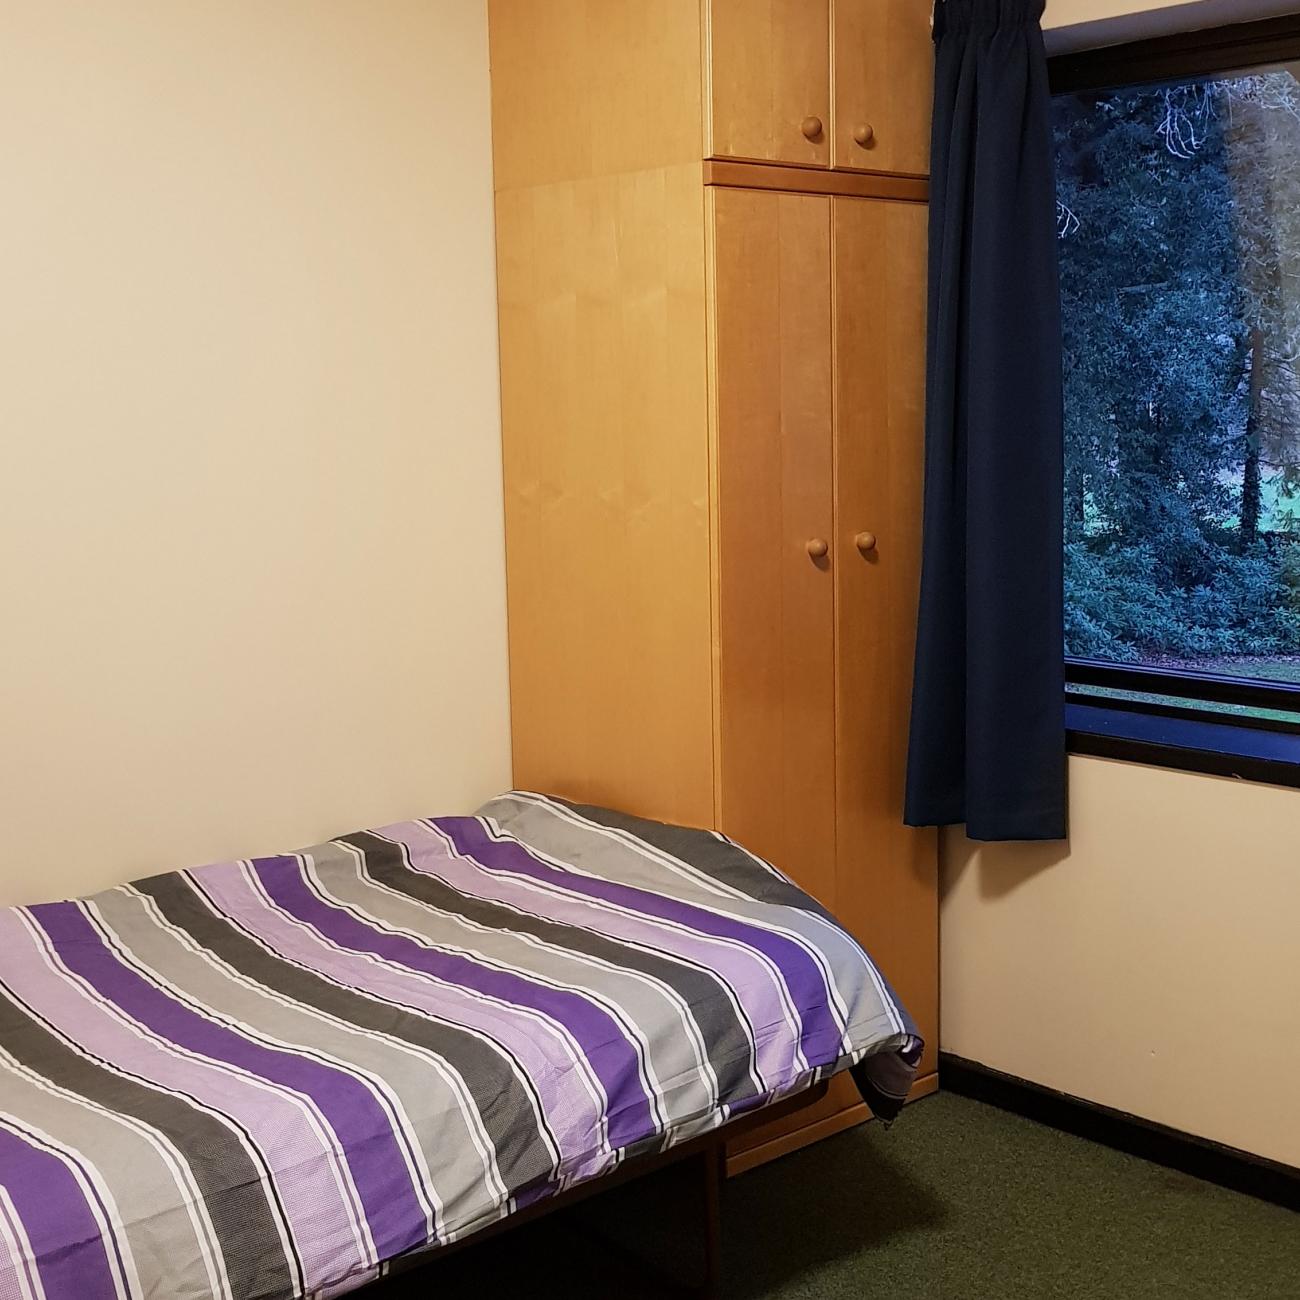 A student bedroom showing a single bed with stripey covers, a tall wooden wardrobe and a window looking out to a landscape filled with trees.